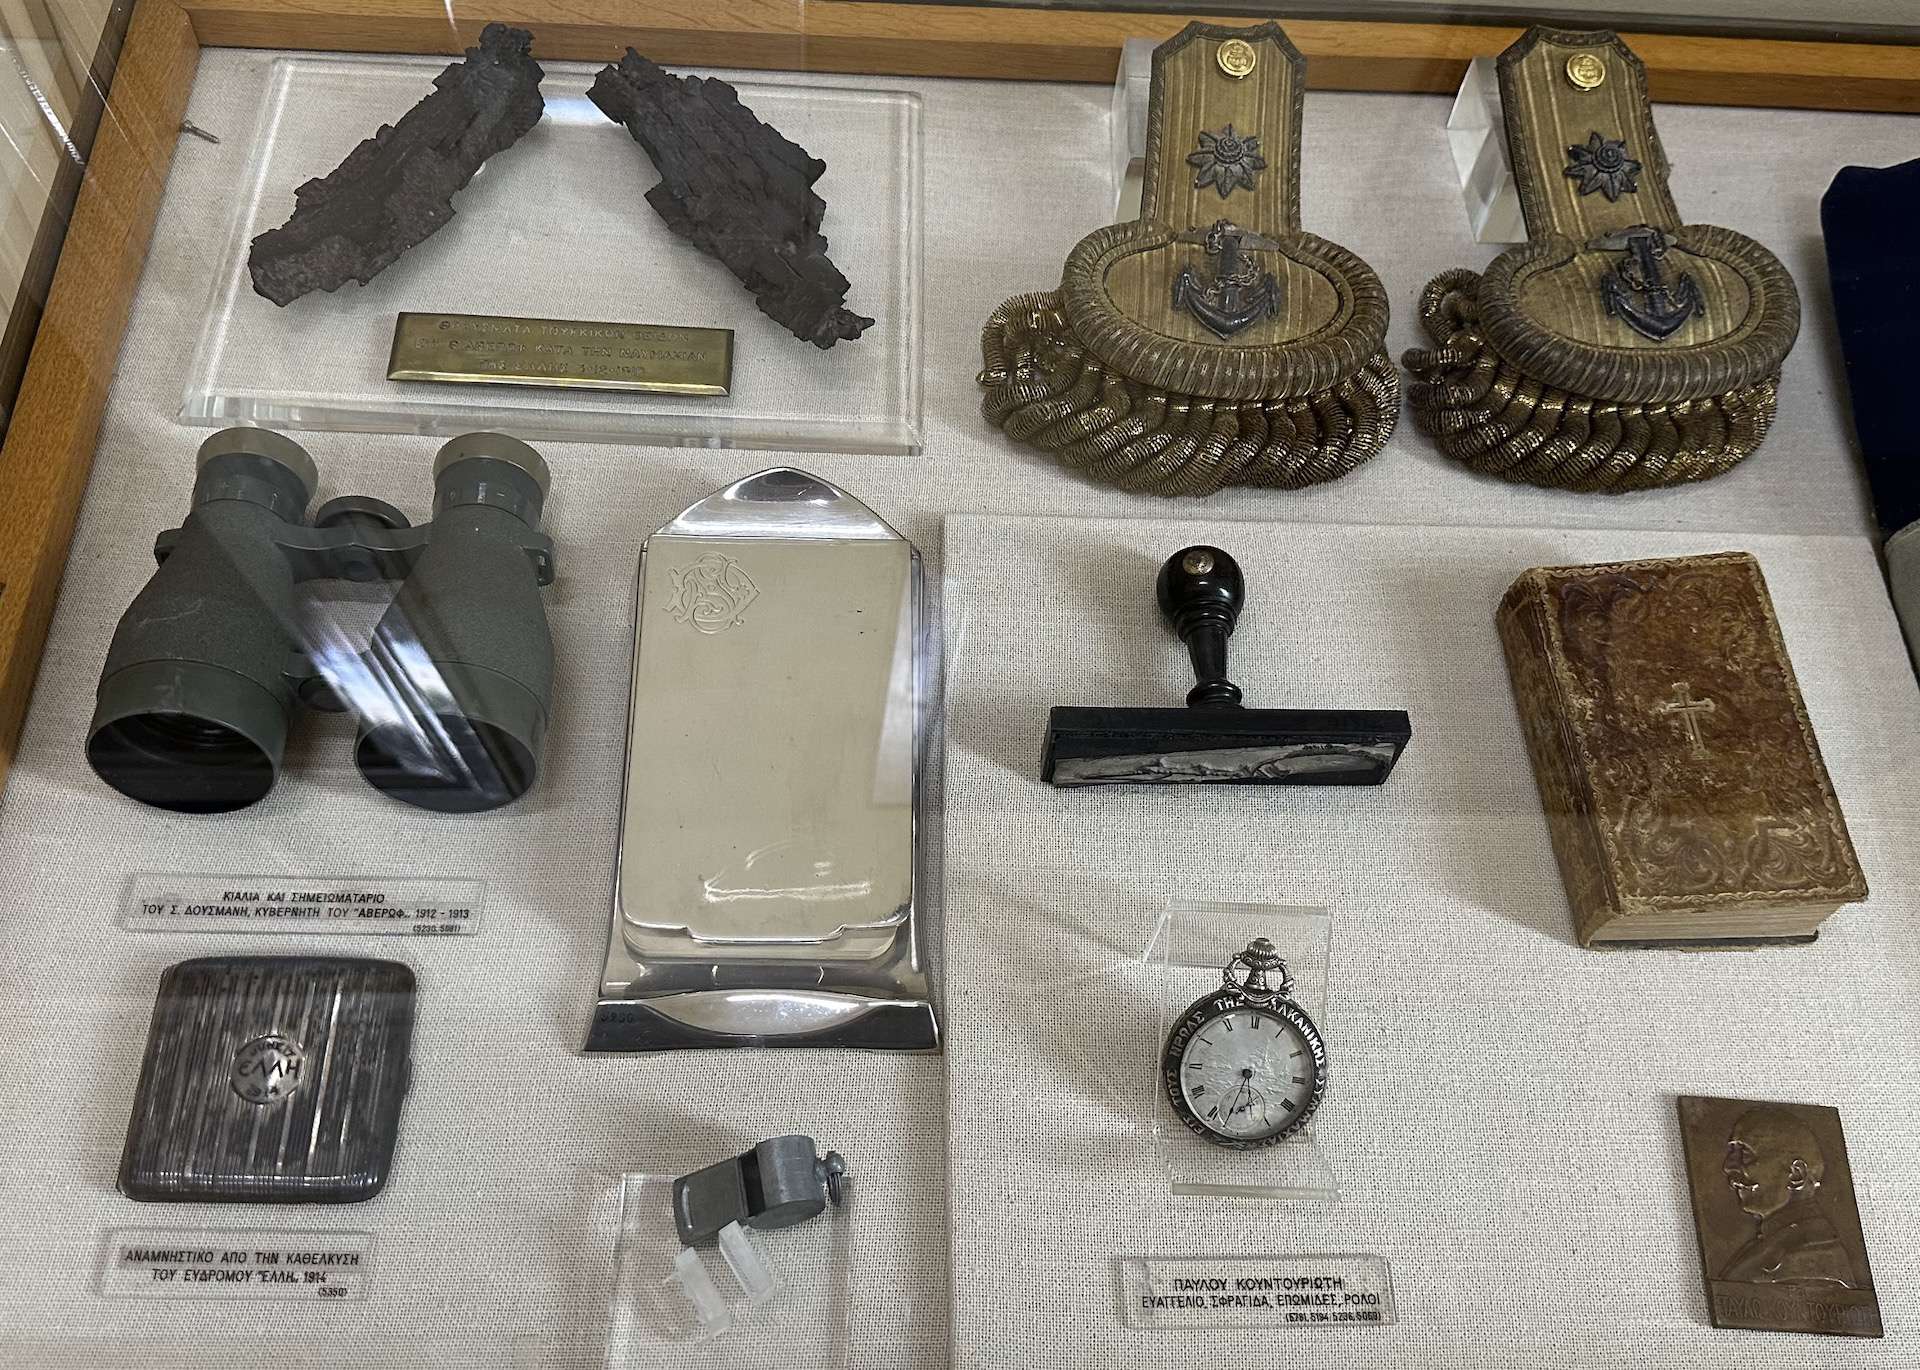 Artifacts from the Balkan Wars